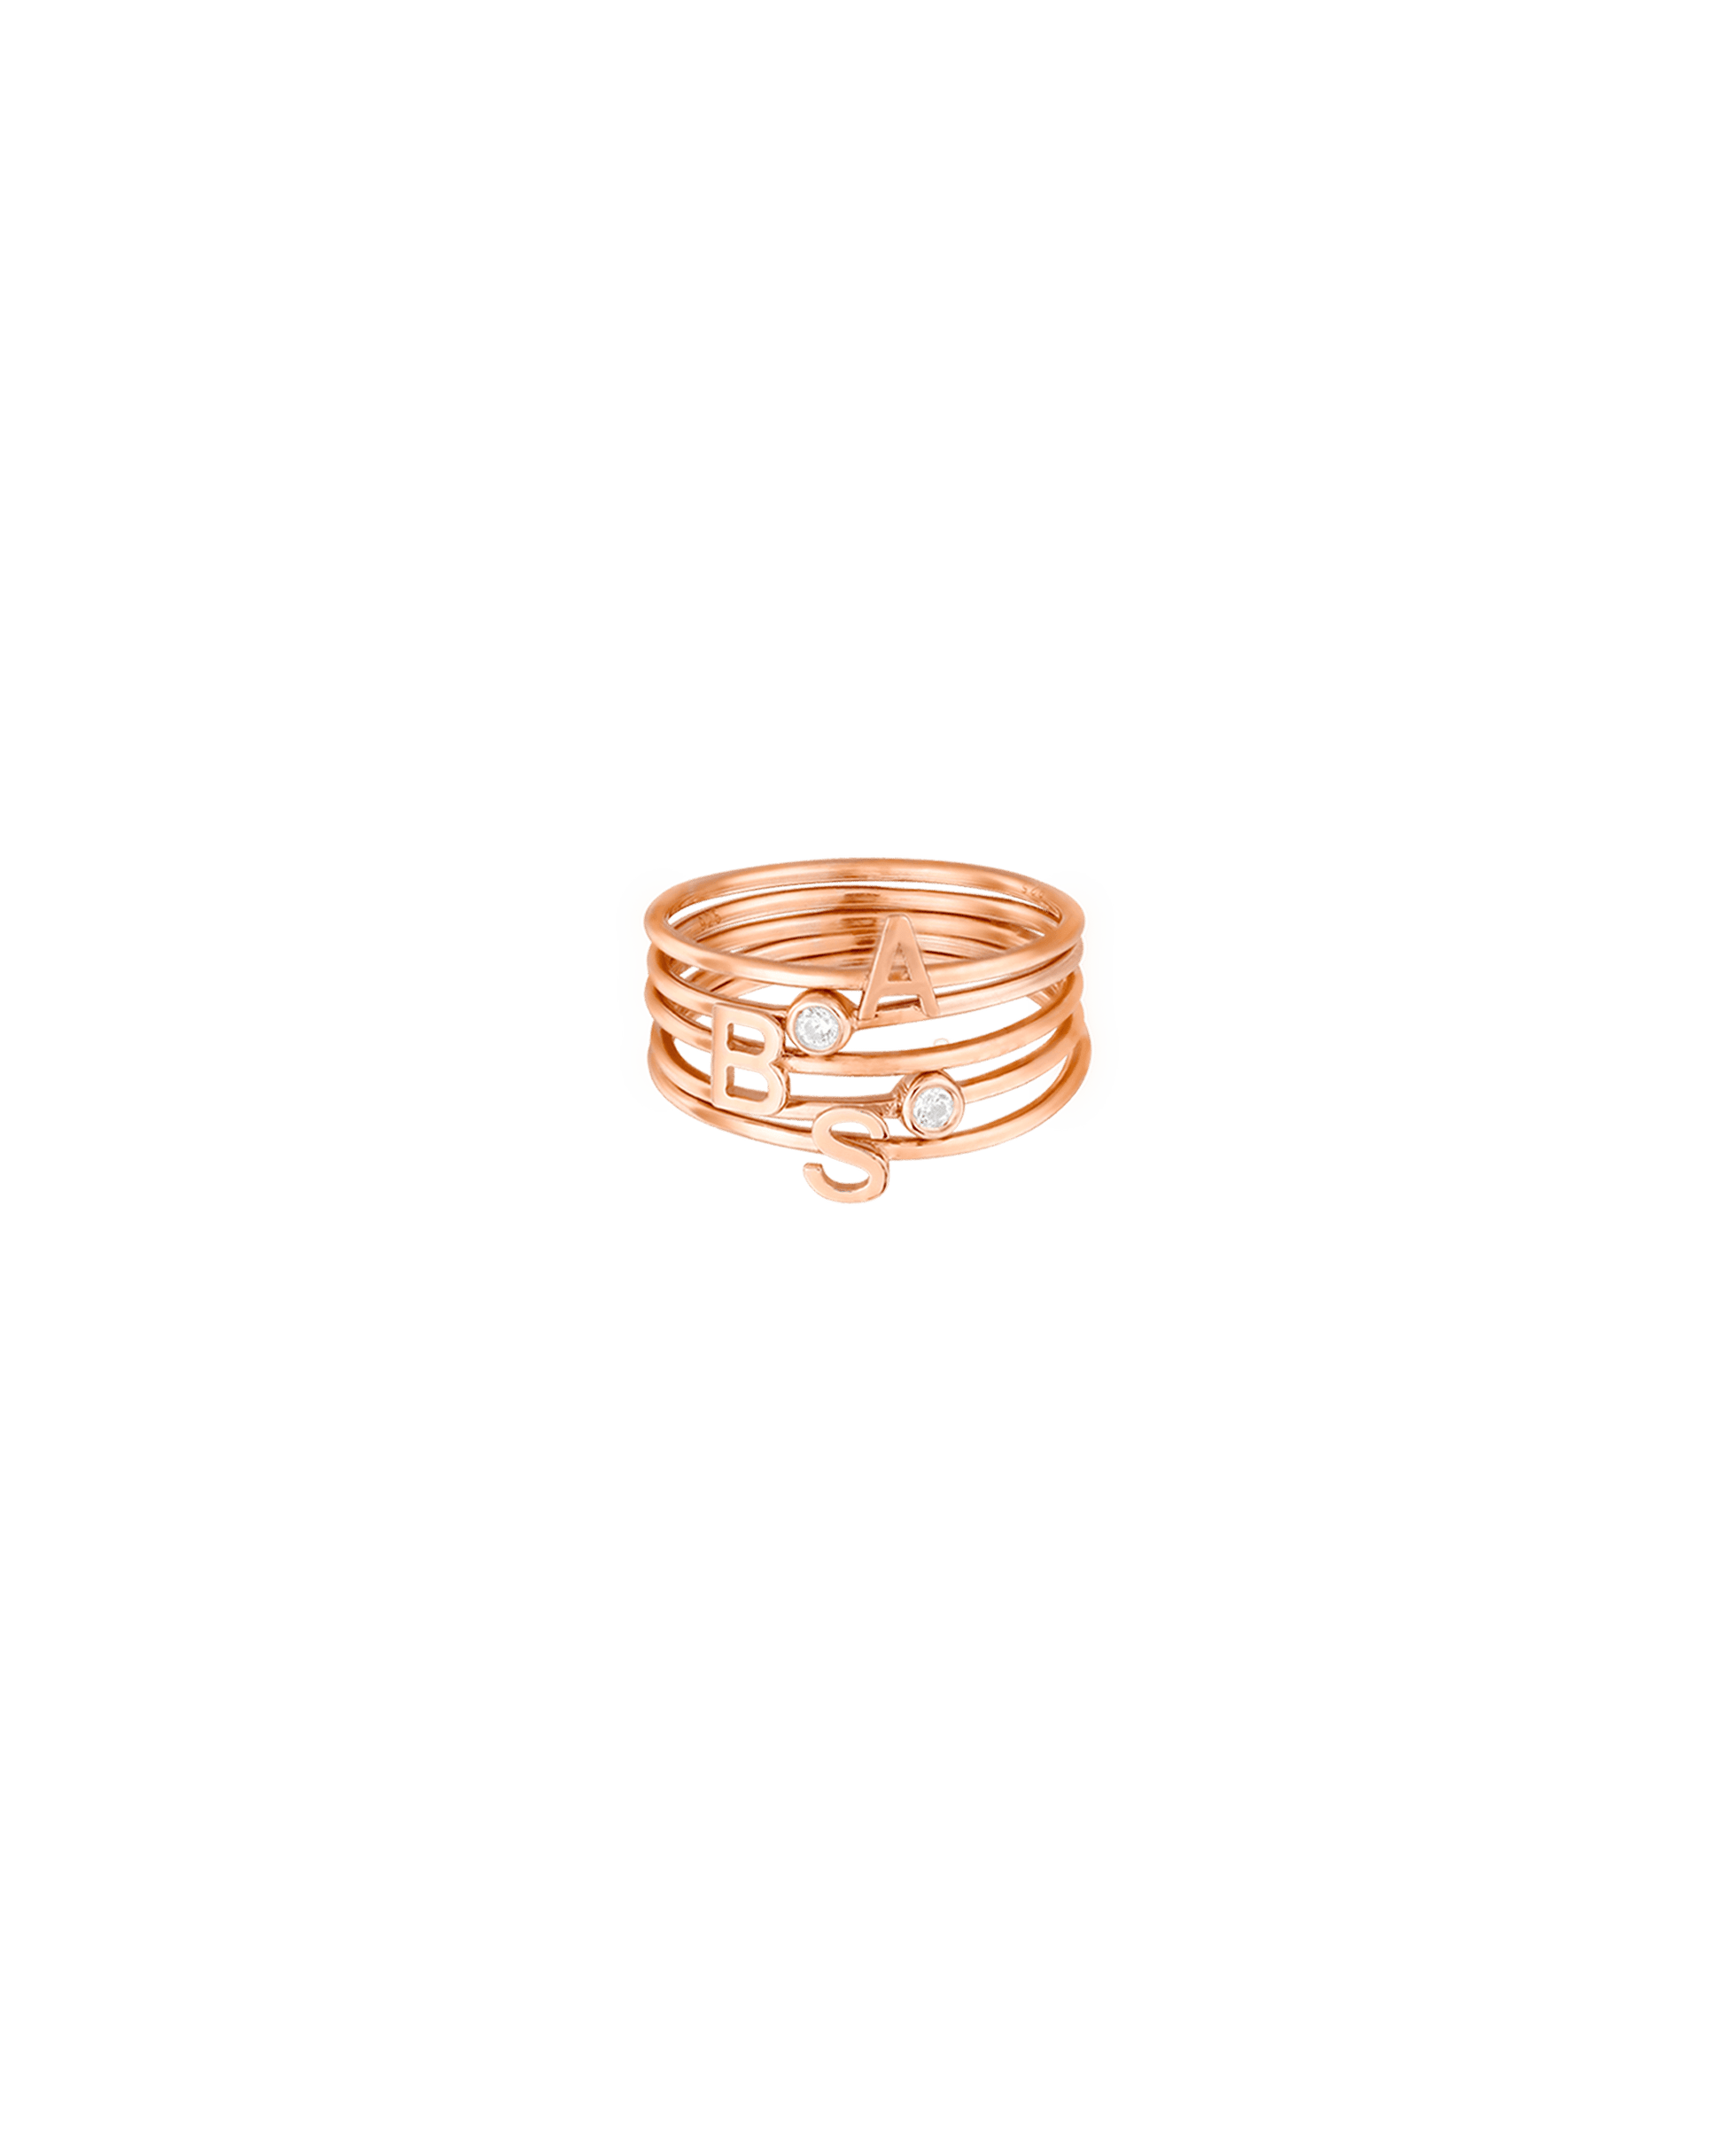 Stackable Initial Ring(s) - 14K Yellow Gold Rings magal-dev 